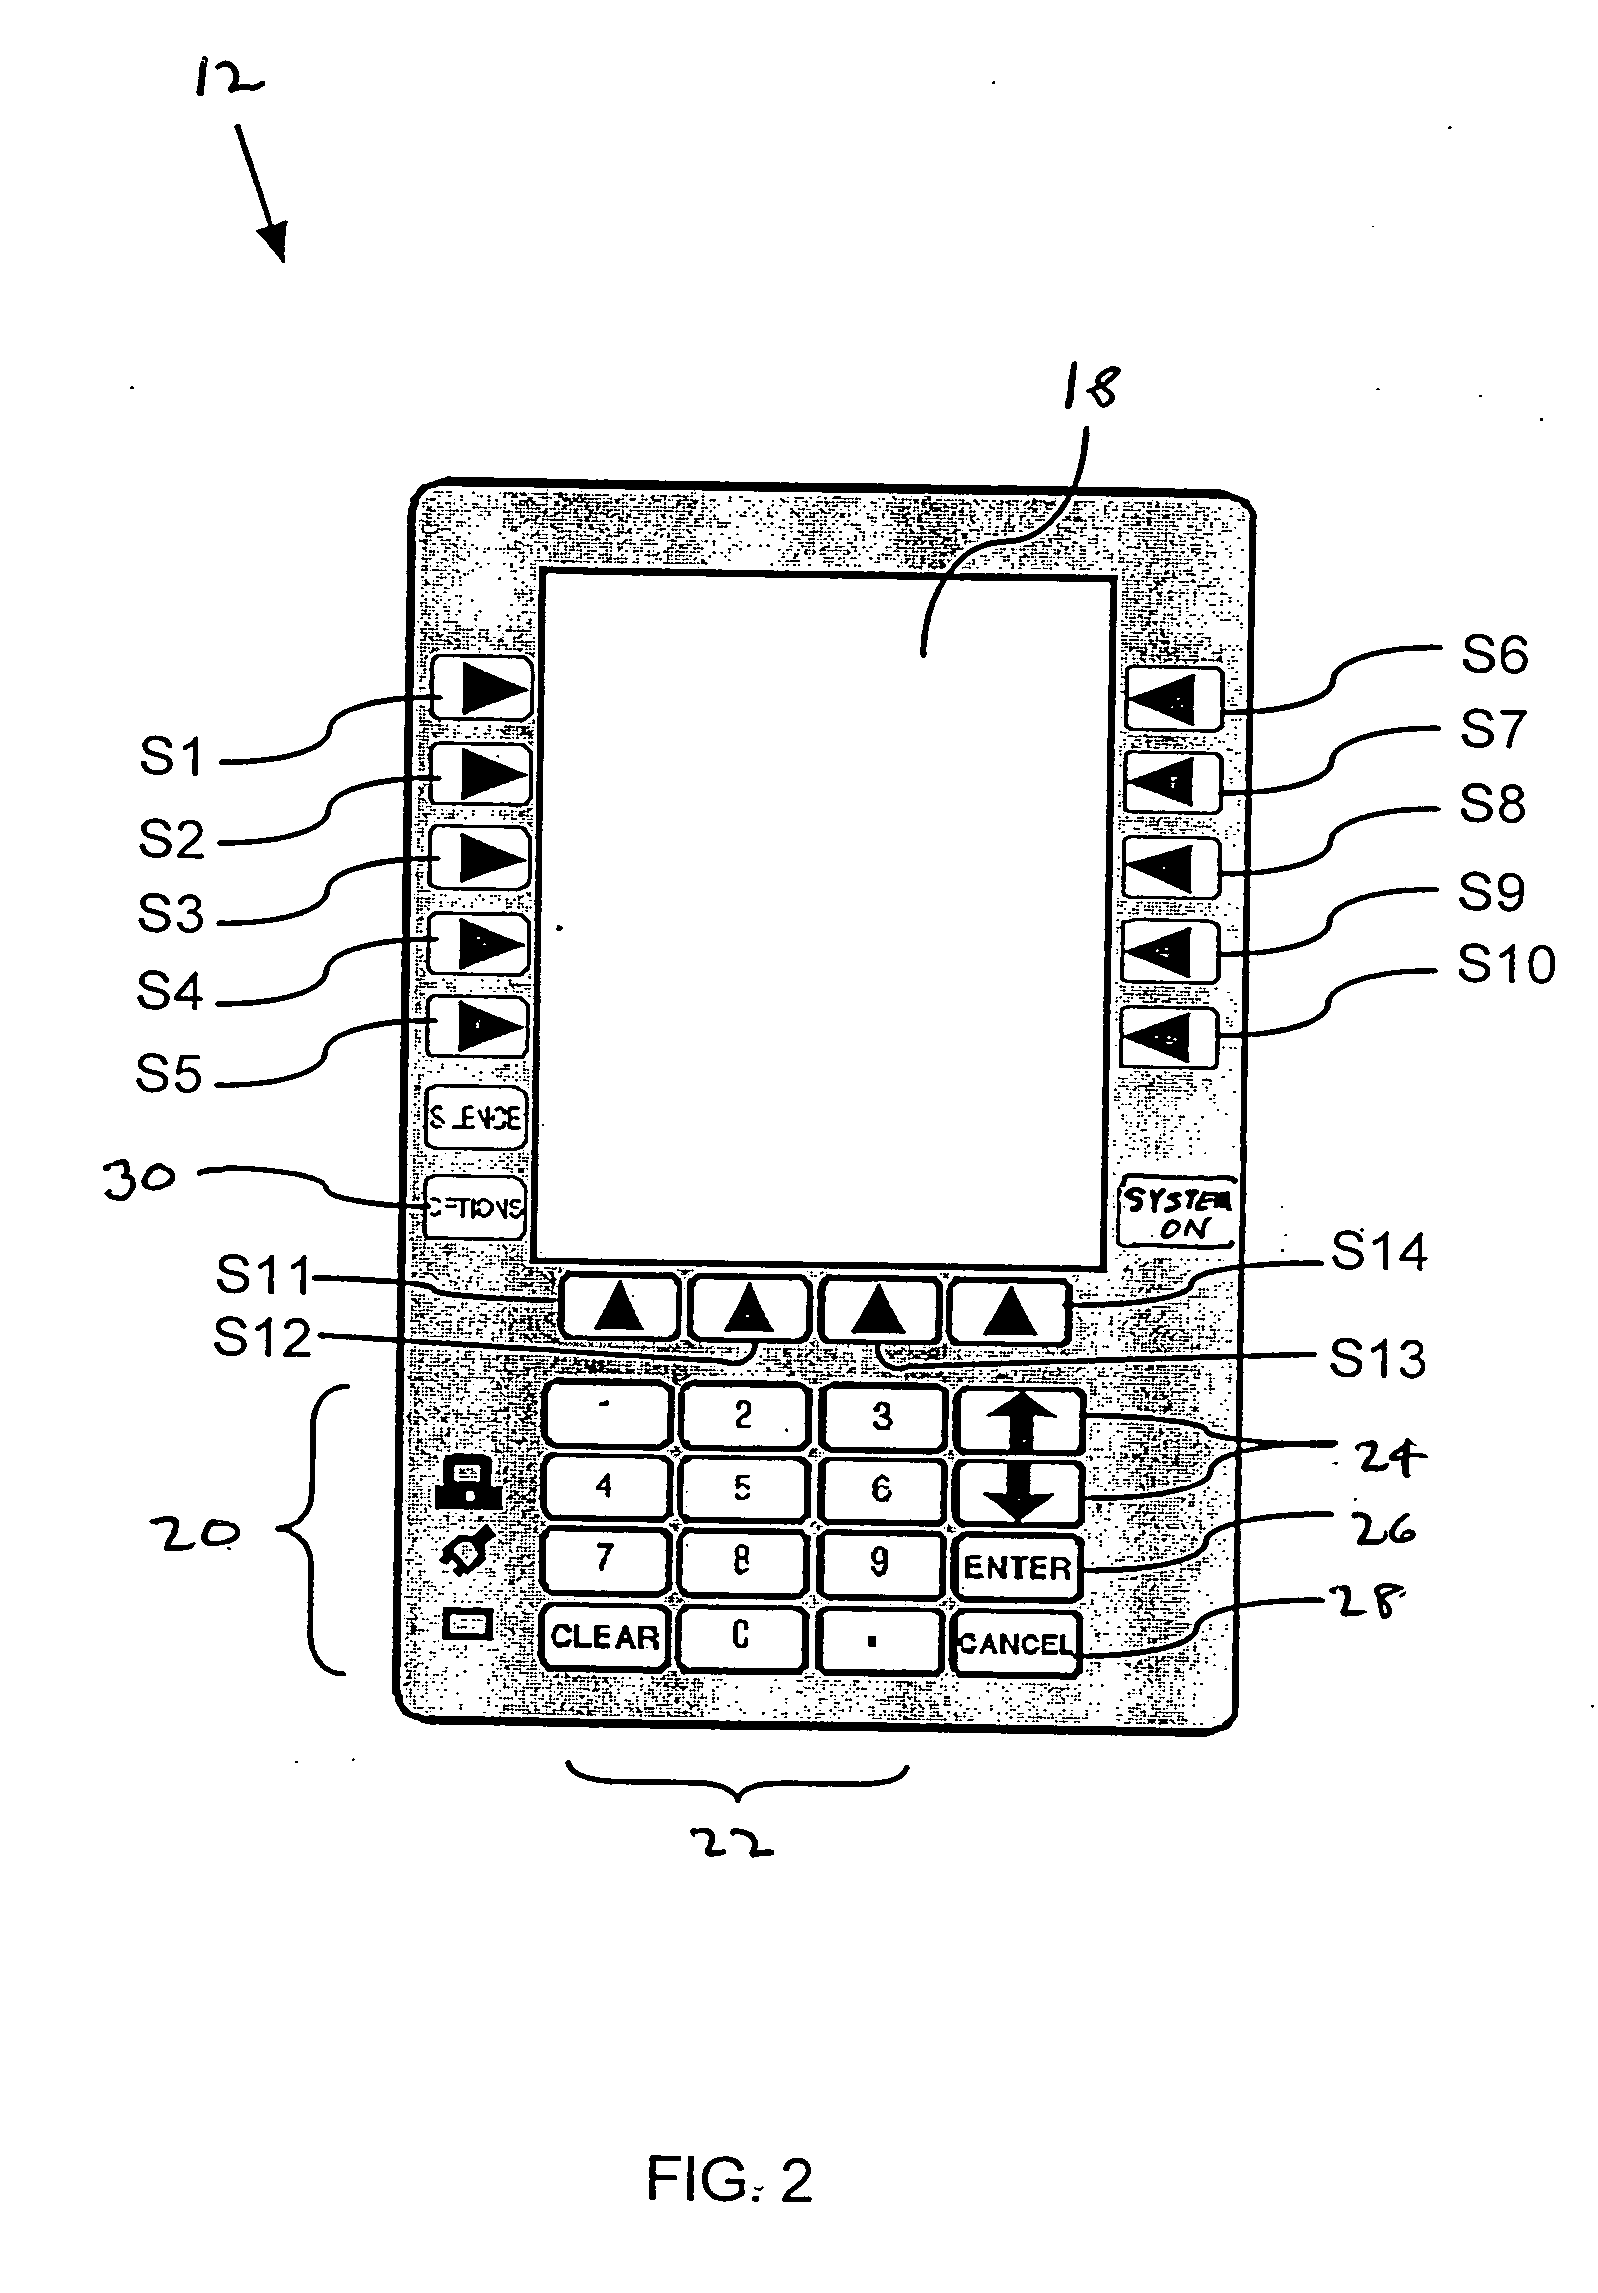 Multichannel coordinated infusion system